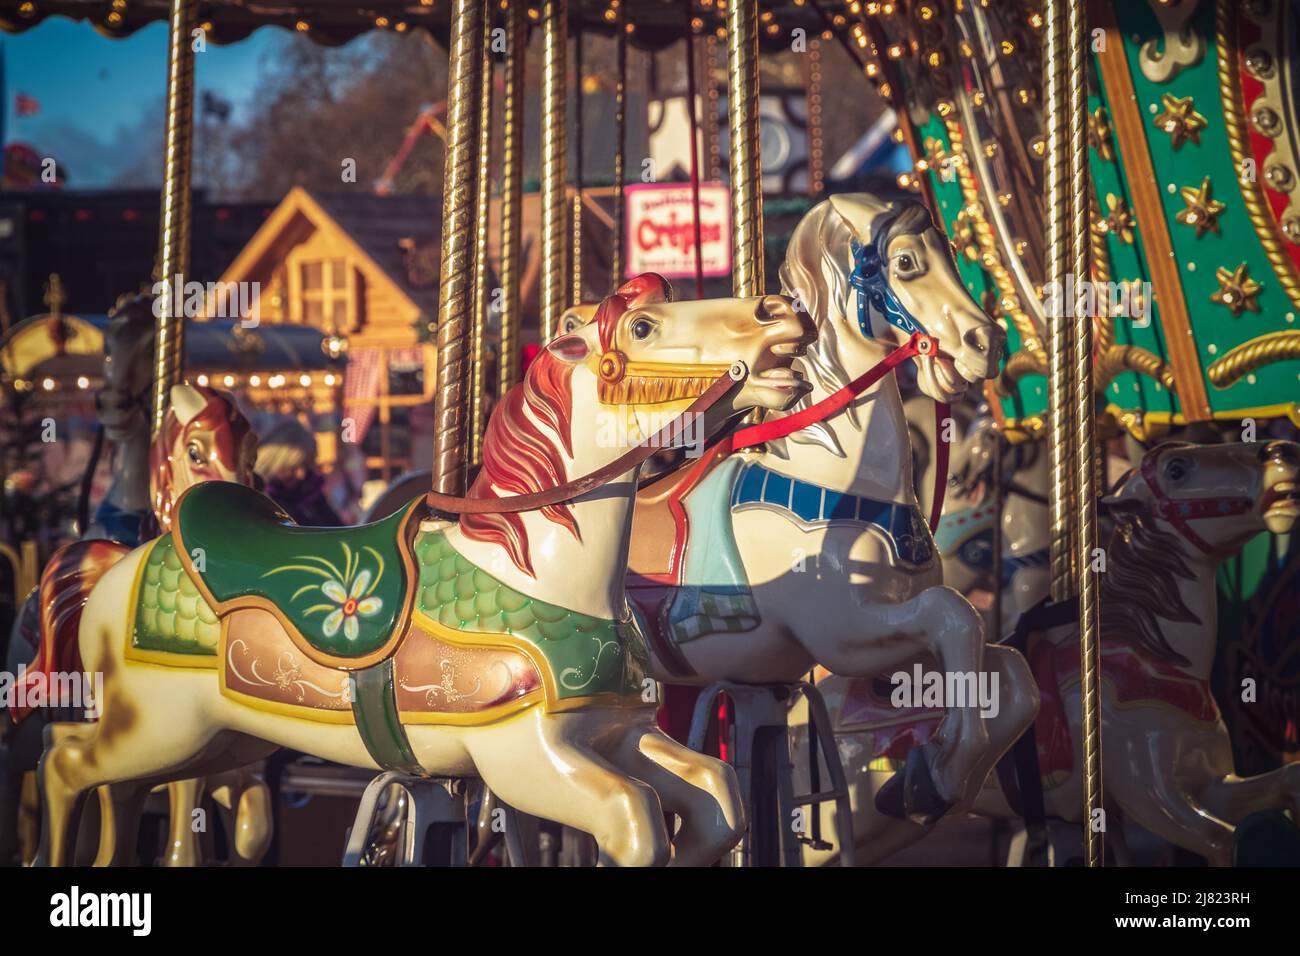 Roundabout or merry-go-round at Christmas funfair Hyde Park Winter Wonderland in London Stock Photo